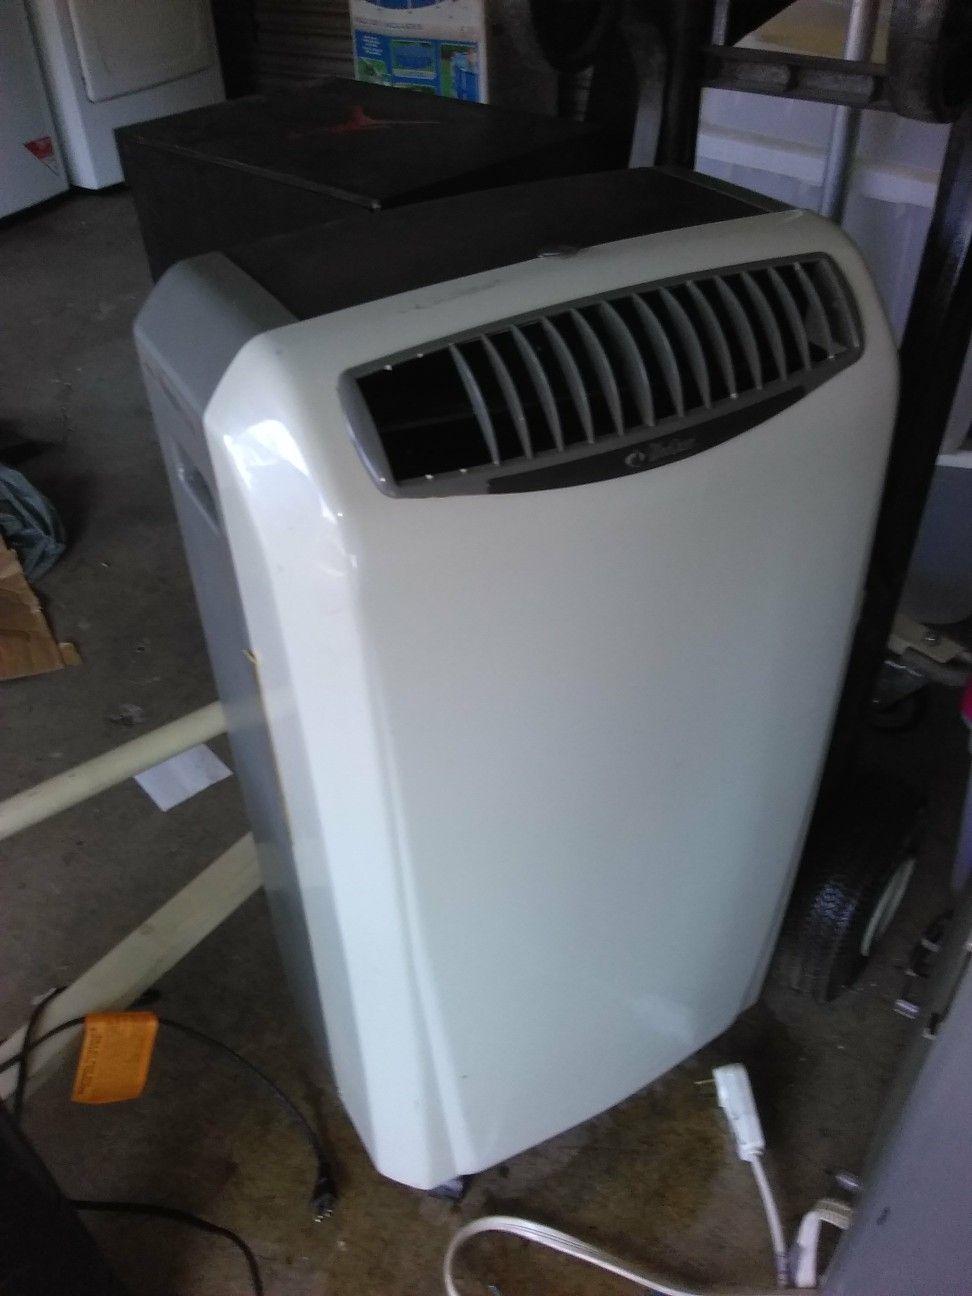 USED HONEYWELL PORTABLE AIR CONDITIONER AND DEHUMIDIFIER